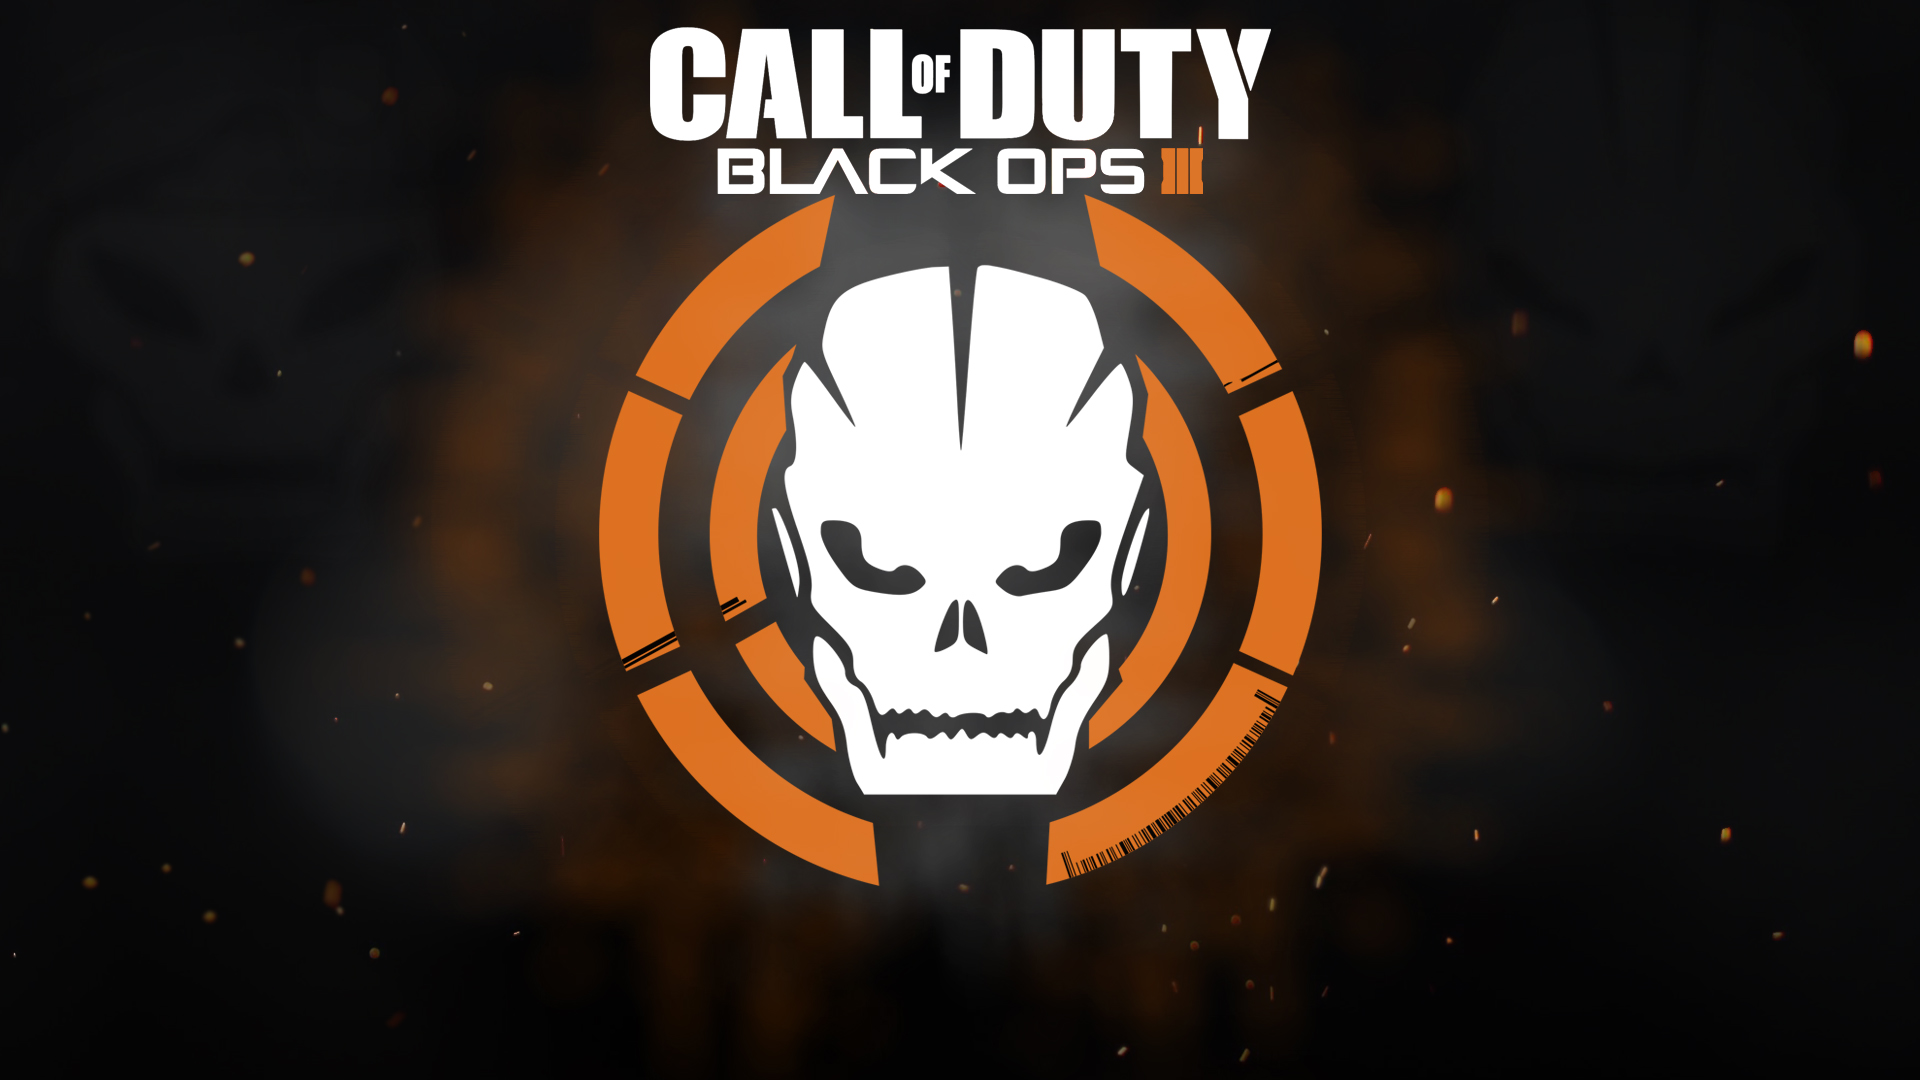 call of duty, video game, call of duty: black ops iii